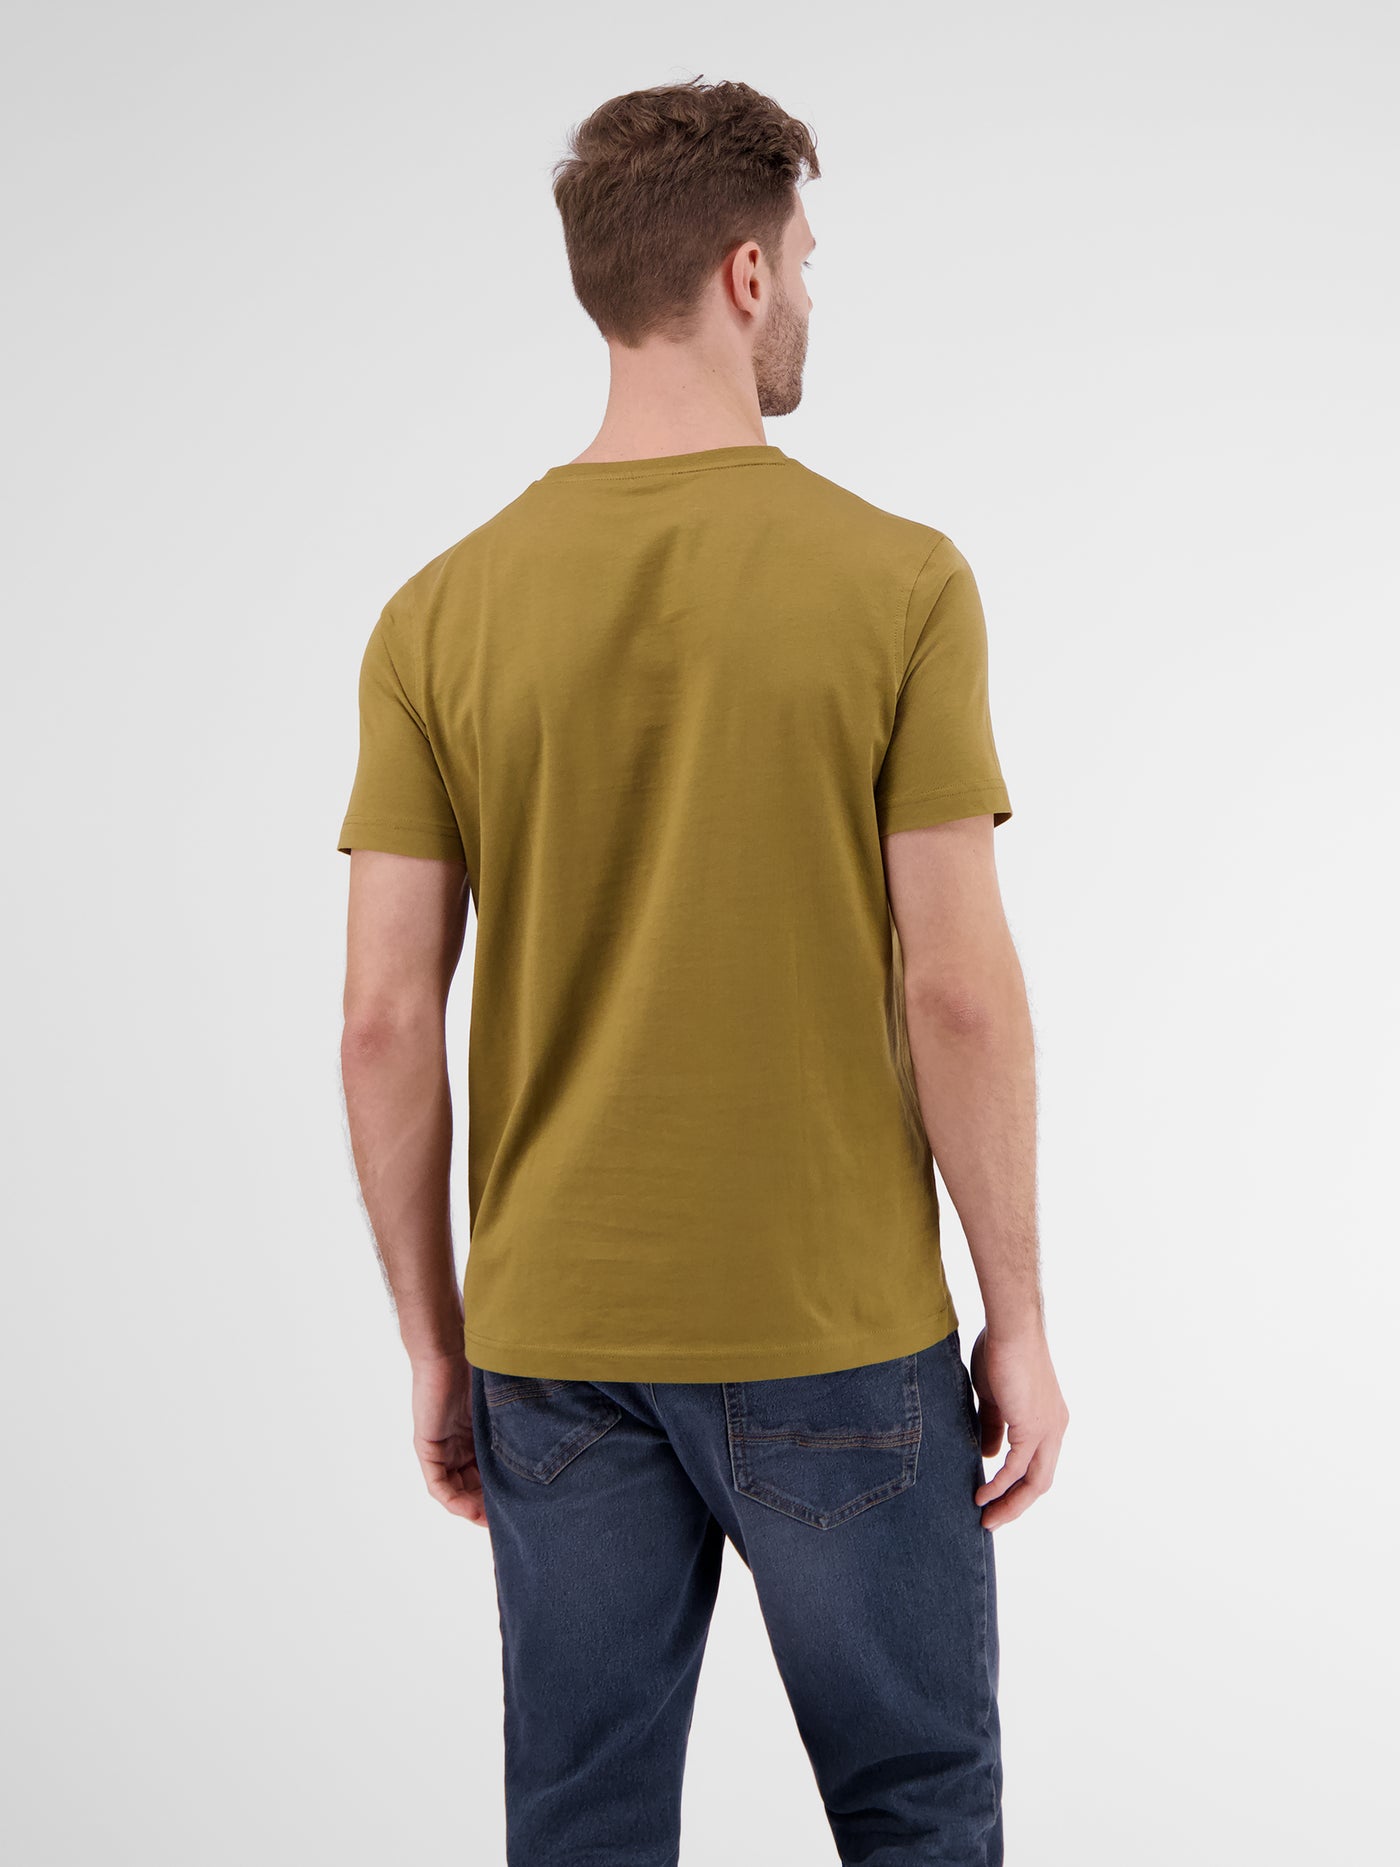 Basic T-shirt in many colors